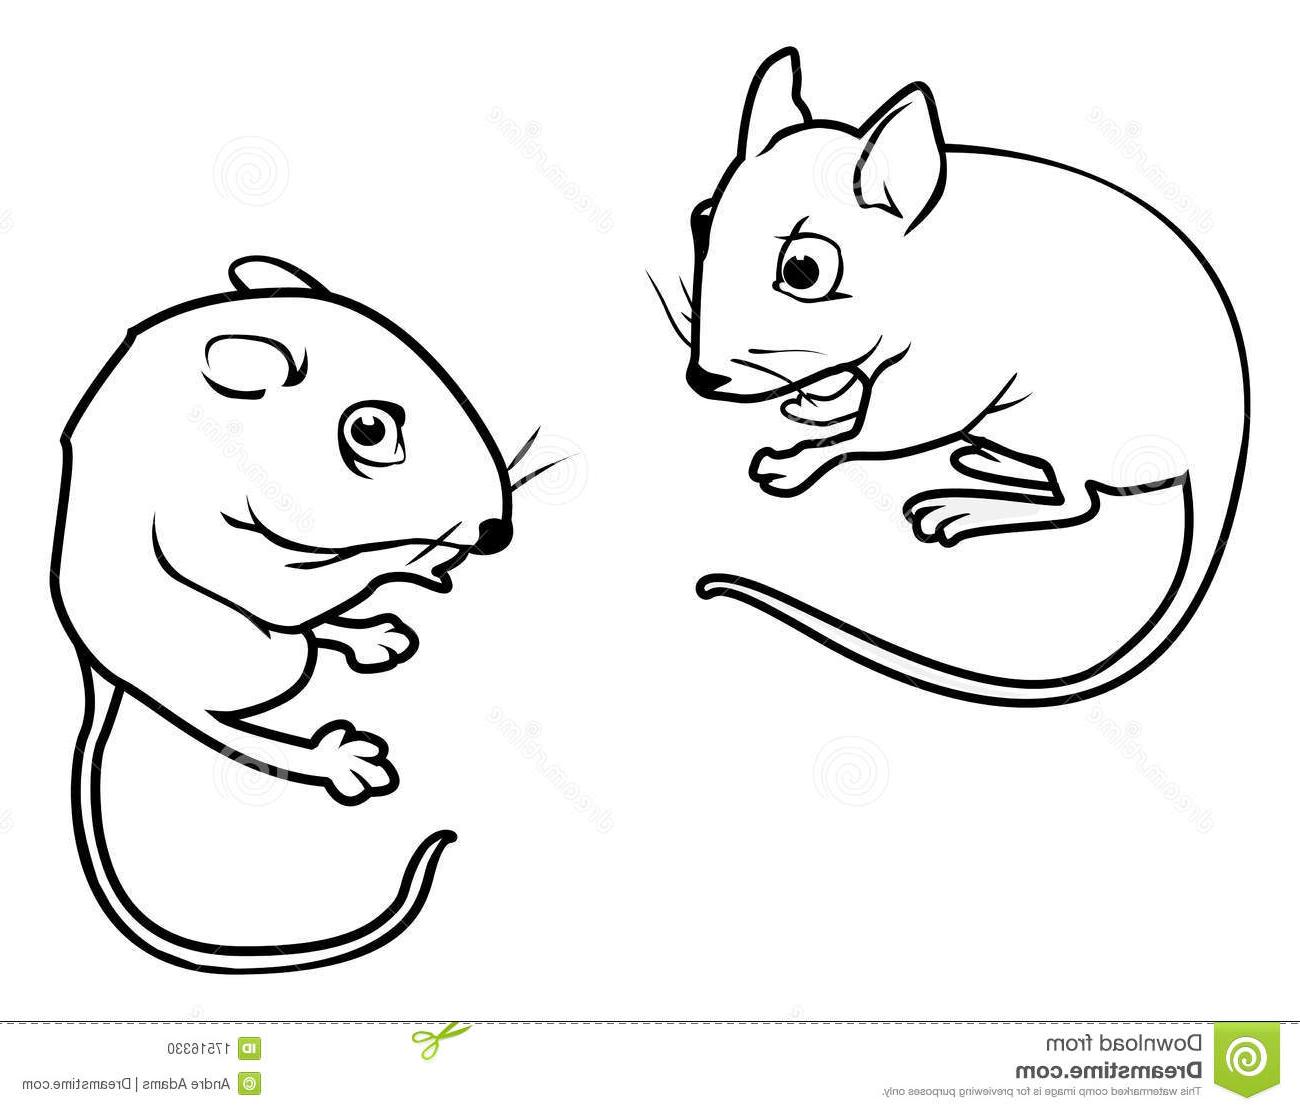 mouse clipart two mouse